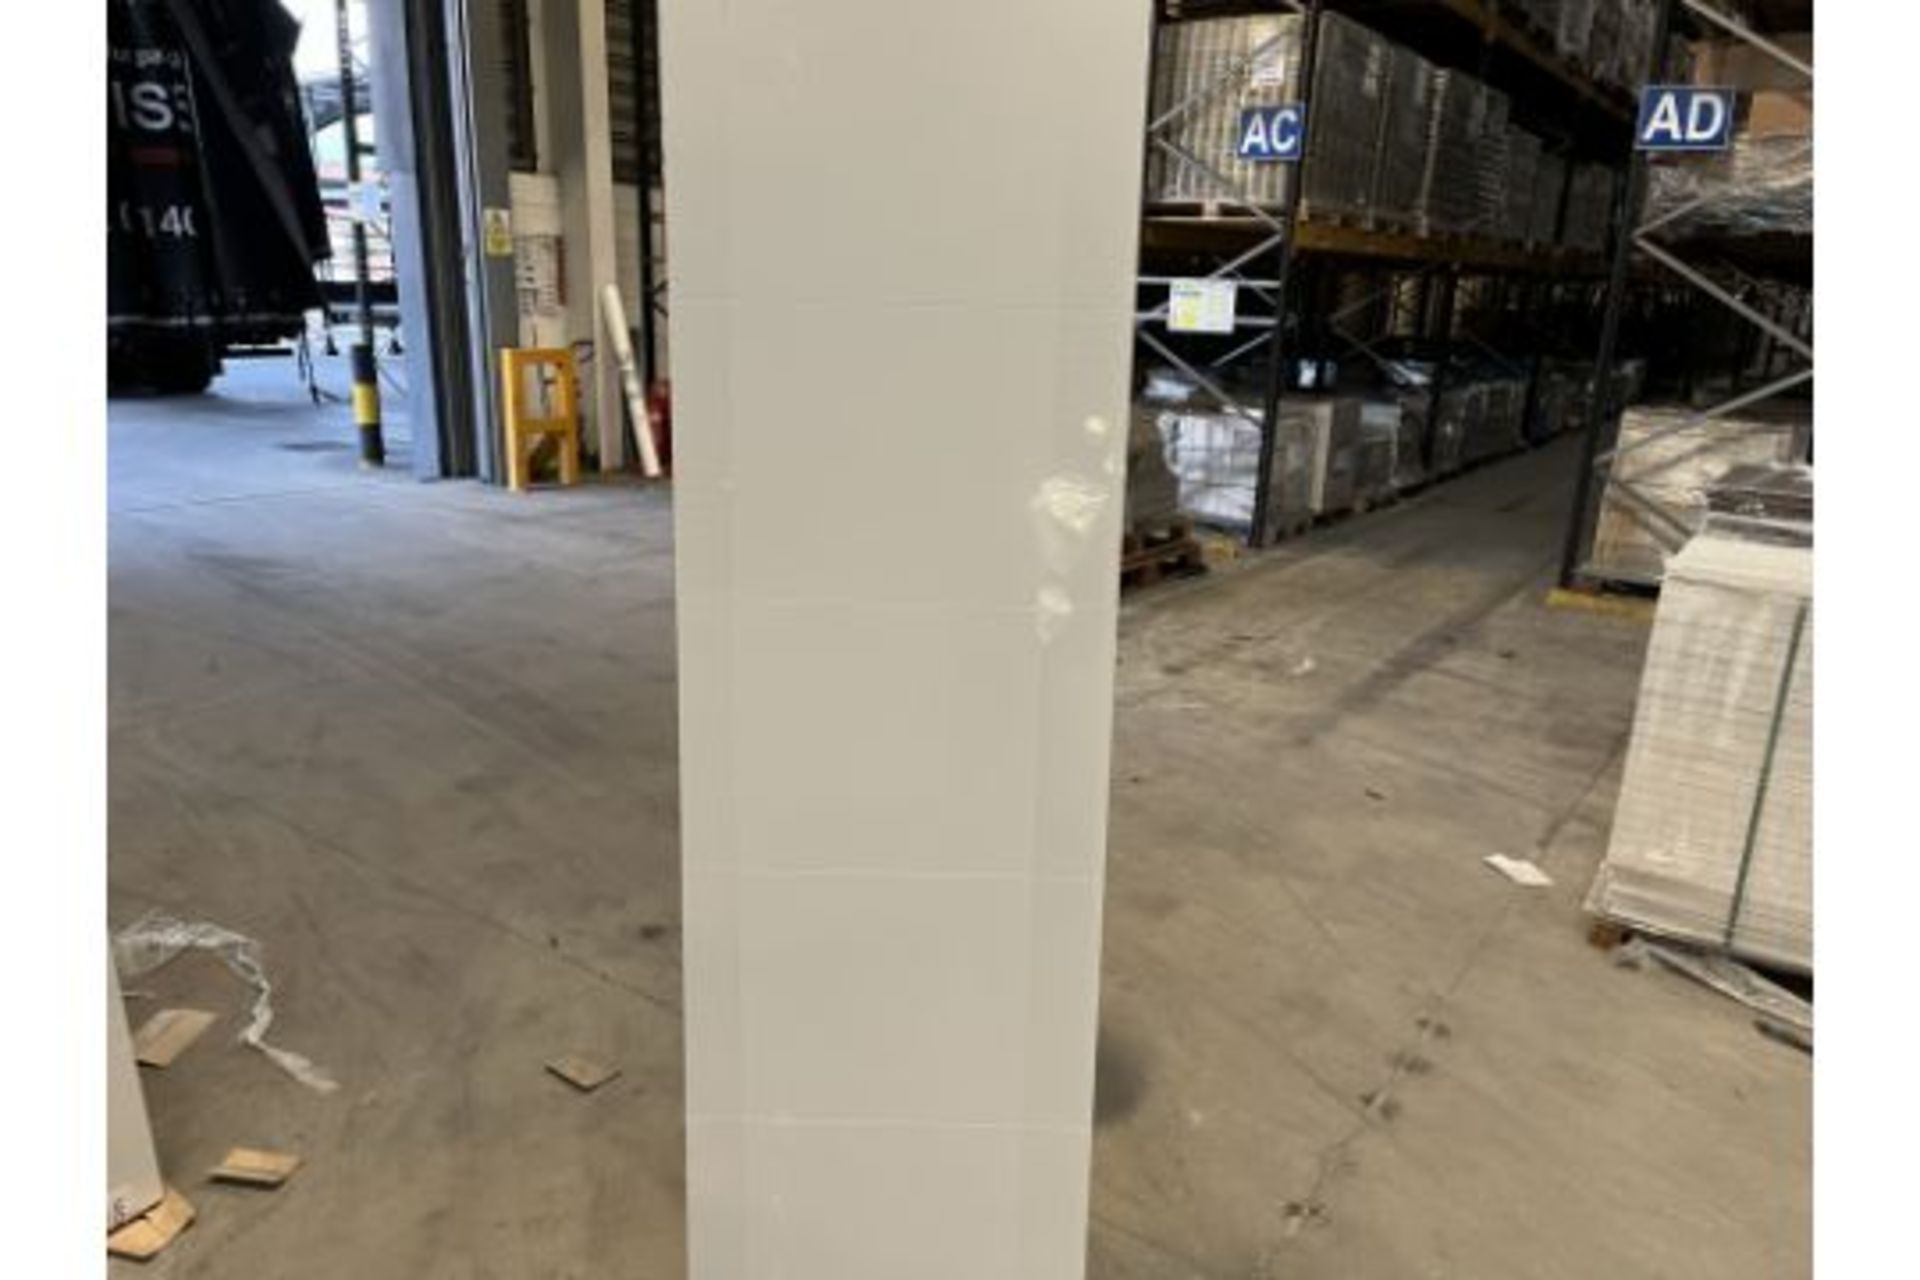 PALLET TO CONTAIN 6 X BRAND NEW WHITE WOOD GRAIN 5 PANEL FIRE DOORS 78 X 24 X 1.7 INCHES (IM)